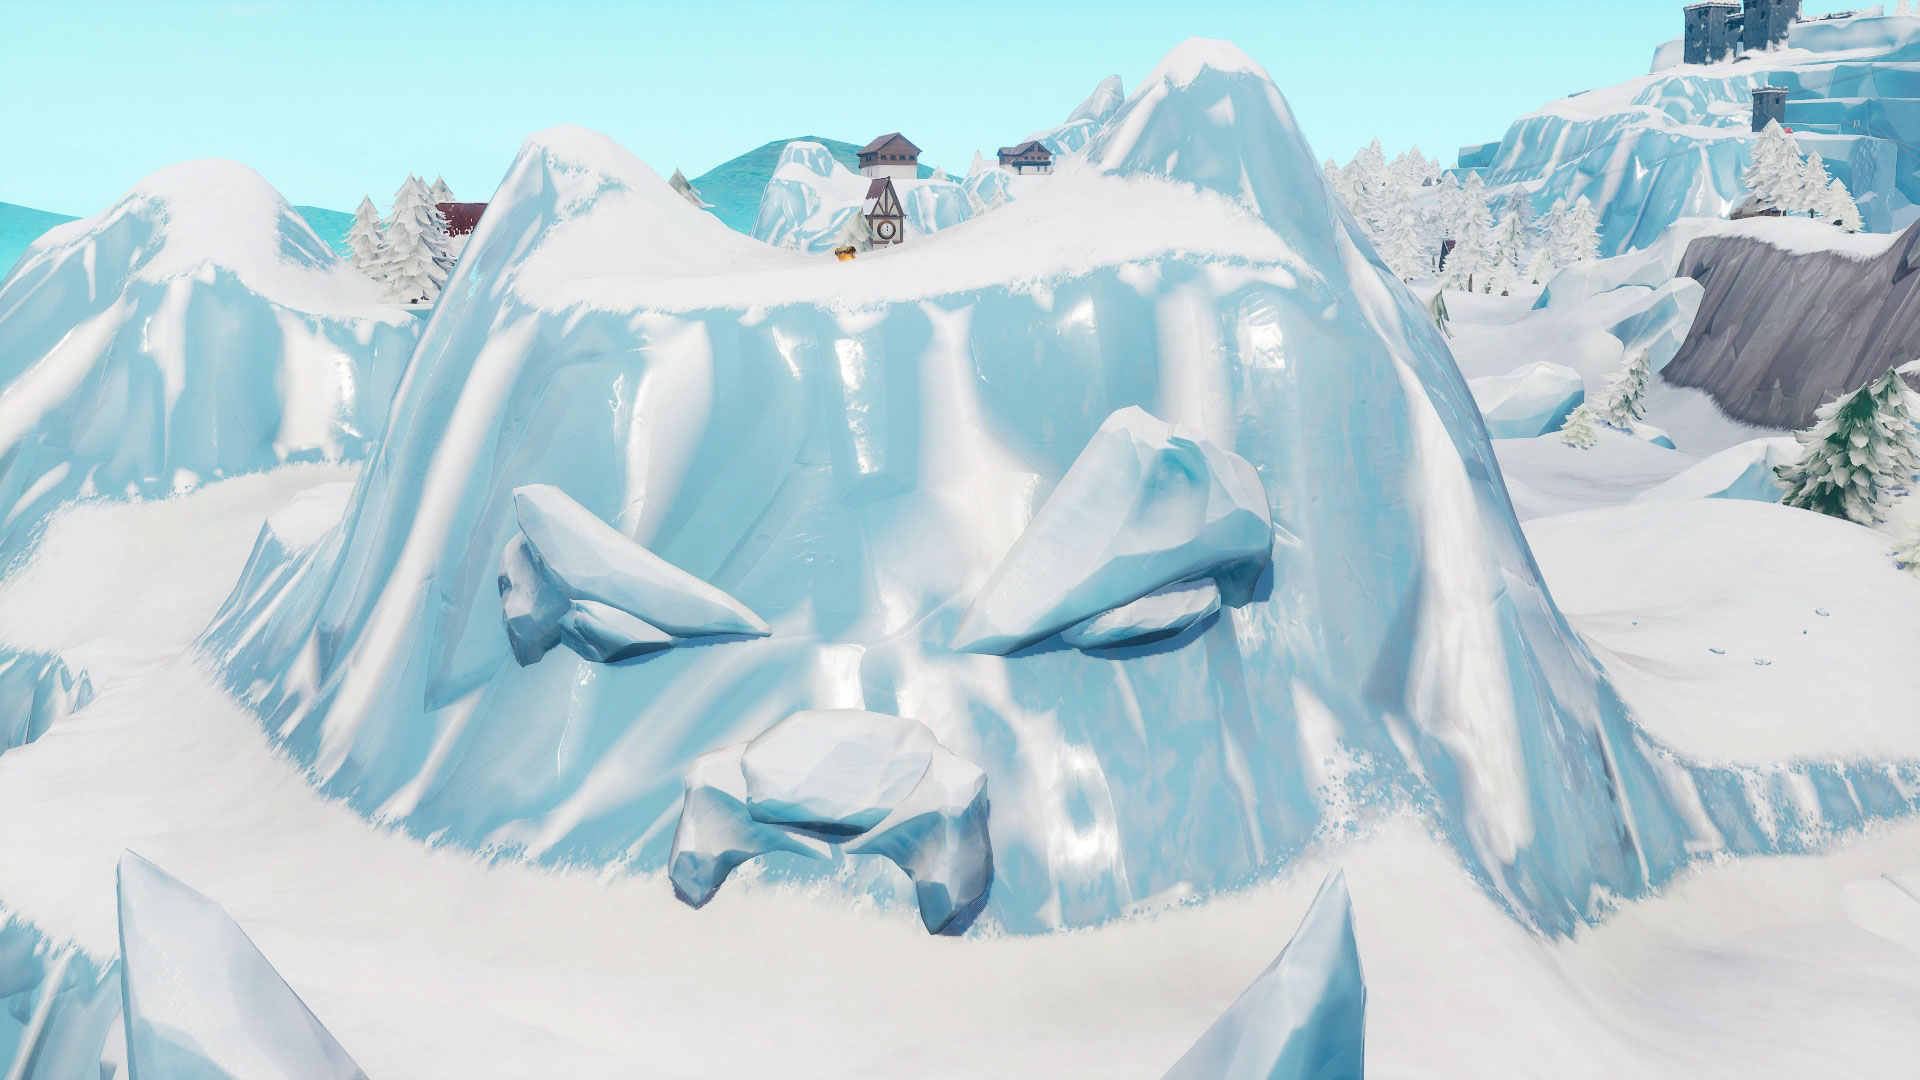 where to visit a giant face in the desert the jungle and the snow in fortnite season 8 week 1 challenge gamesradar - fortnite season 8 week 1 visit a giant face in the desert the jungle and the snow